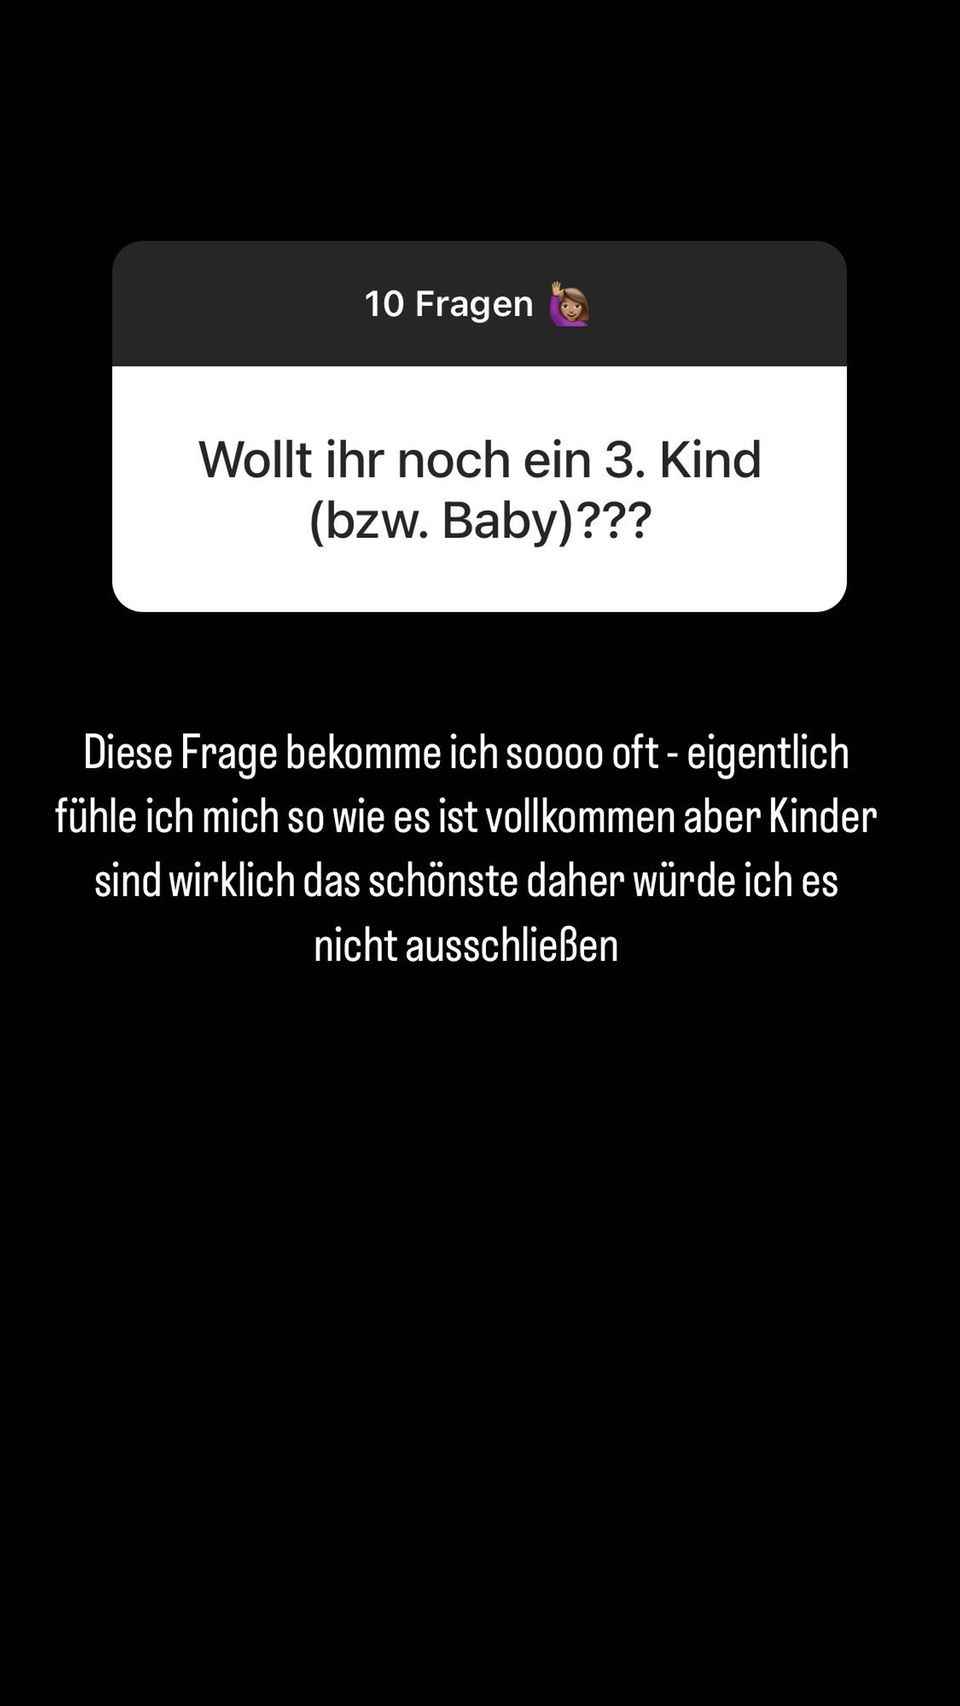 Sarah Engels comments on family planning in her Instagram story.